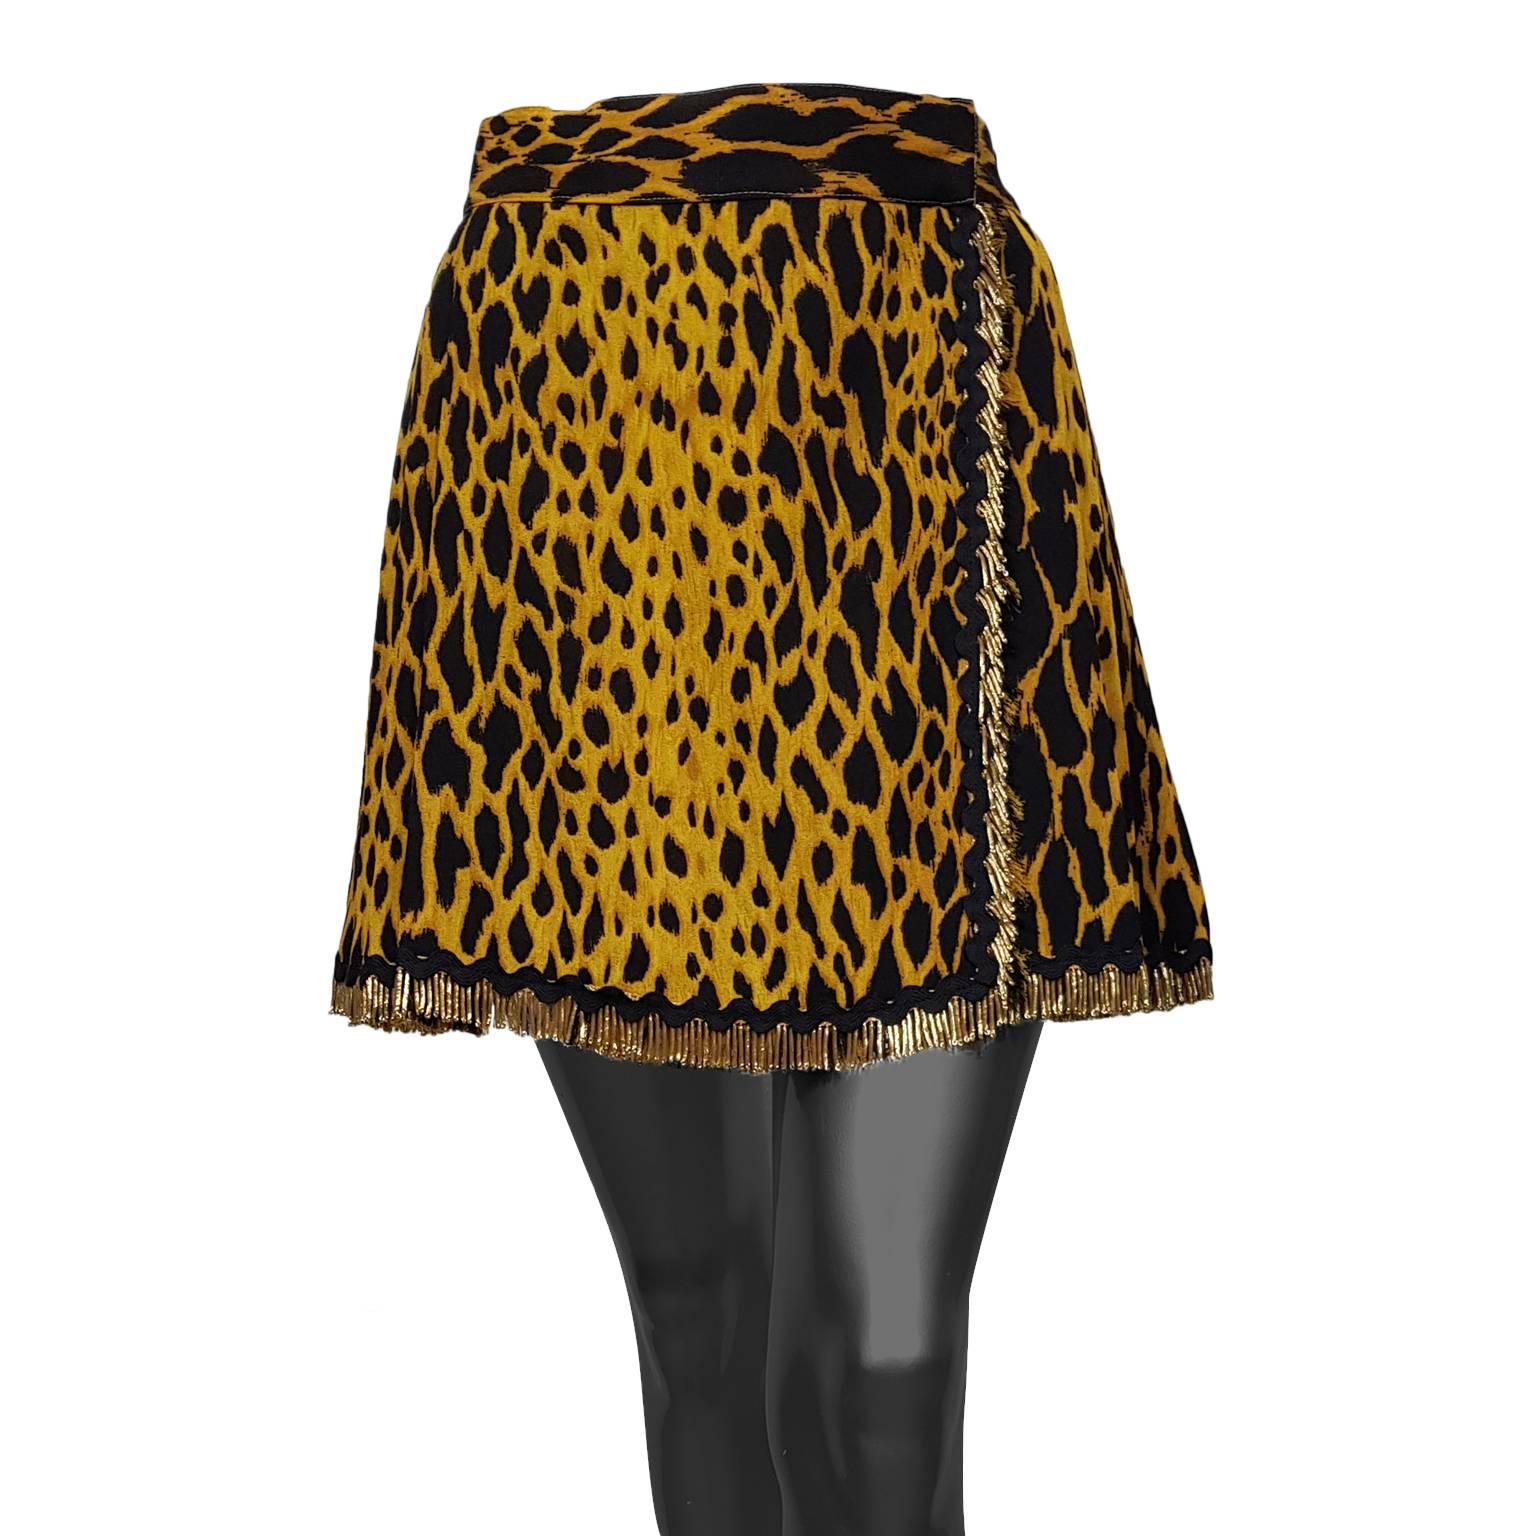 Gianni Versace couture skirt from 1990s.
Featuring animal print with gold-tone fringed edges. 
The skirt wraps around the body and closes with a hidden button and metal hooks & eyes.
Size : 42(IT)
Measurements : 
Length : 41 cm
Waist : 75 cm